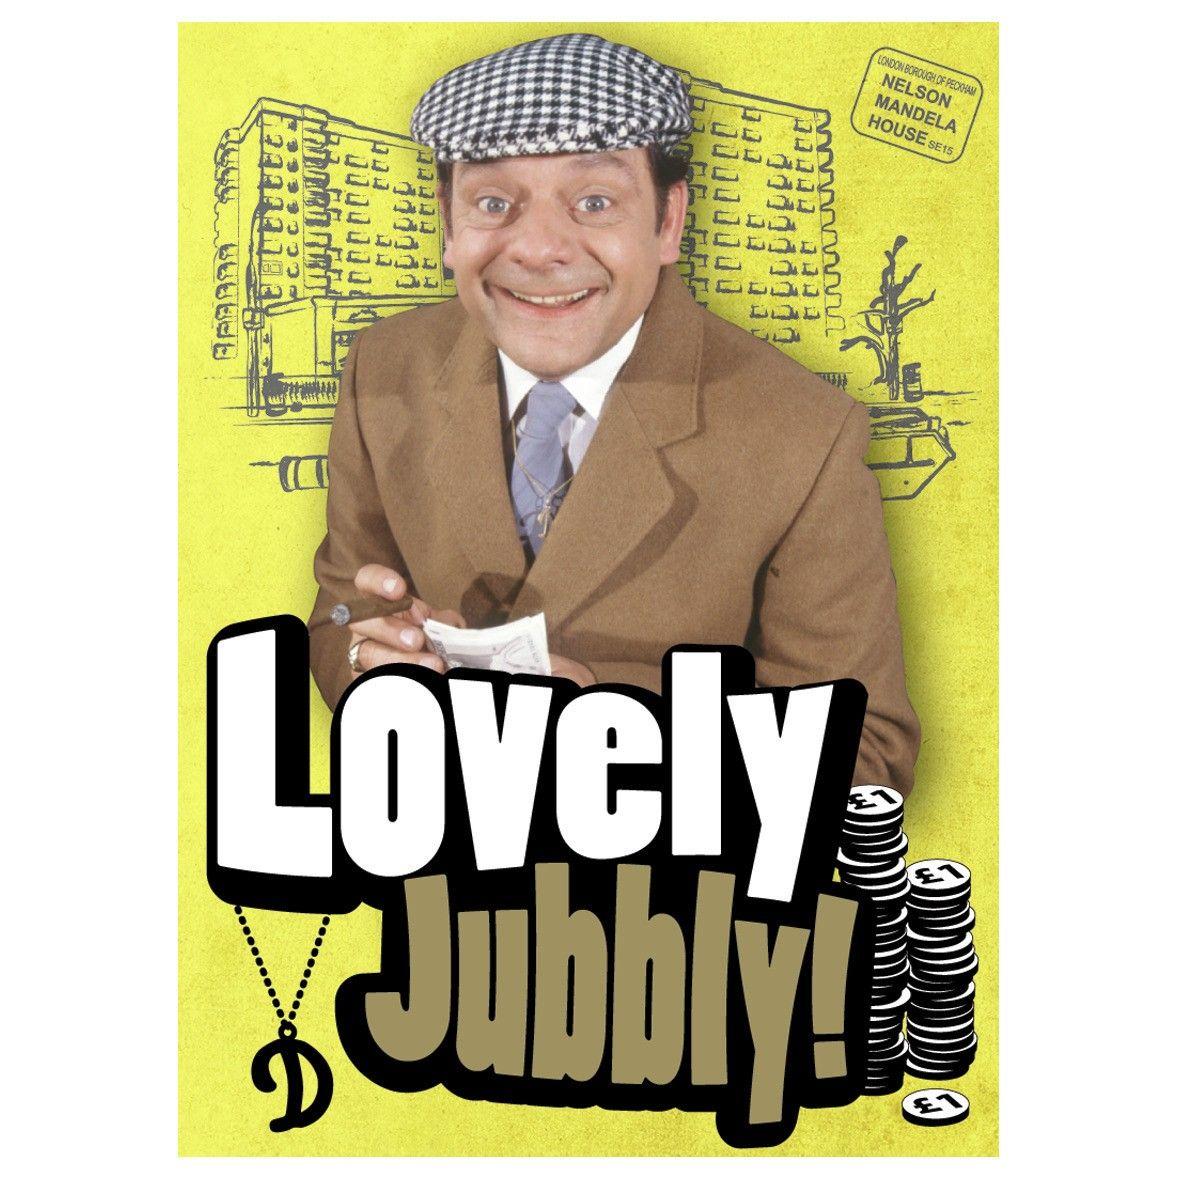 Kuro Hyou image only fools and horses lovely jubbly HD wallpaper